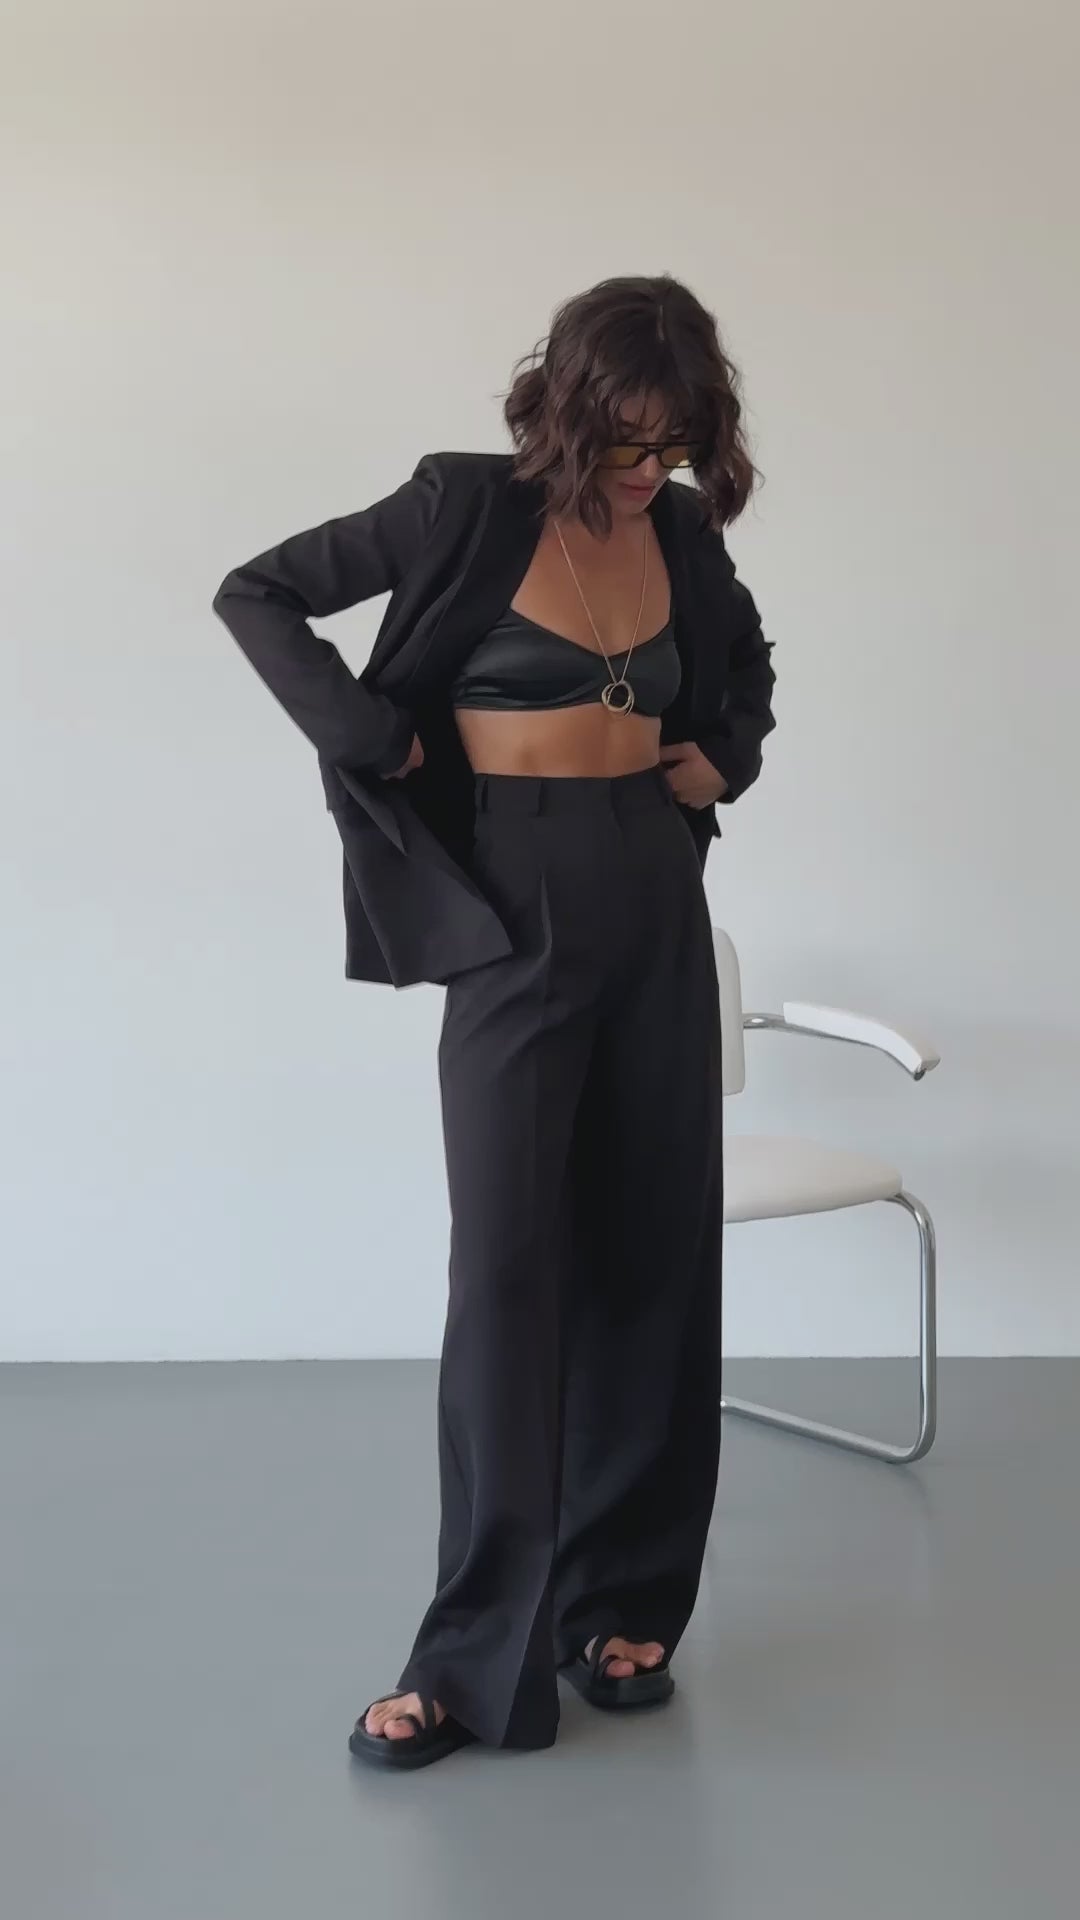 Black SINGLE-BREASTED WIDE-LEG SUIT 2-PIECE (ARTICLE C347)